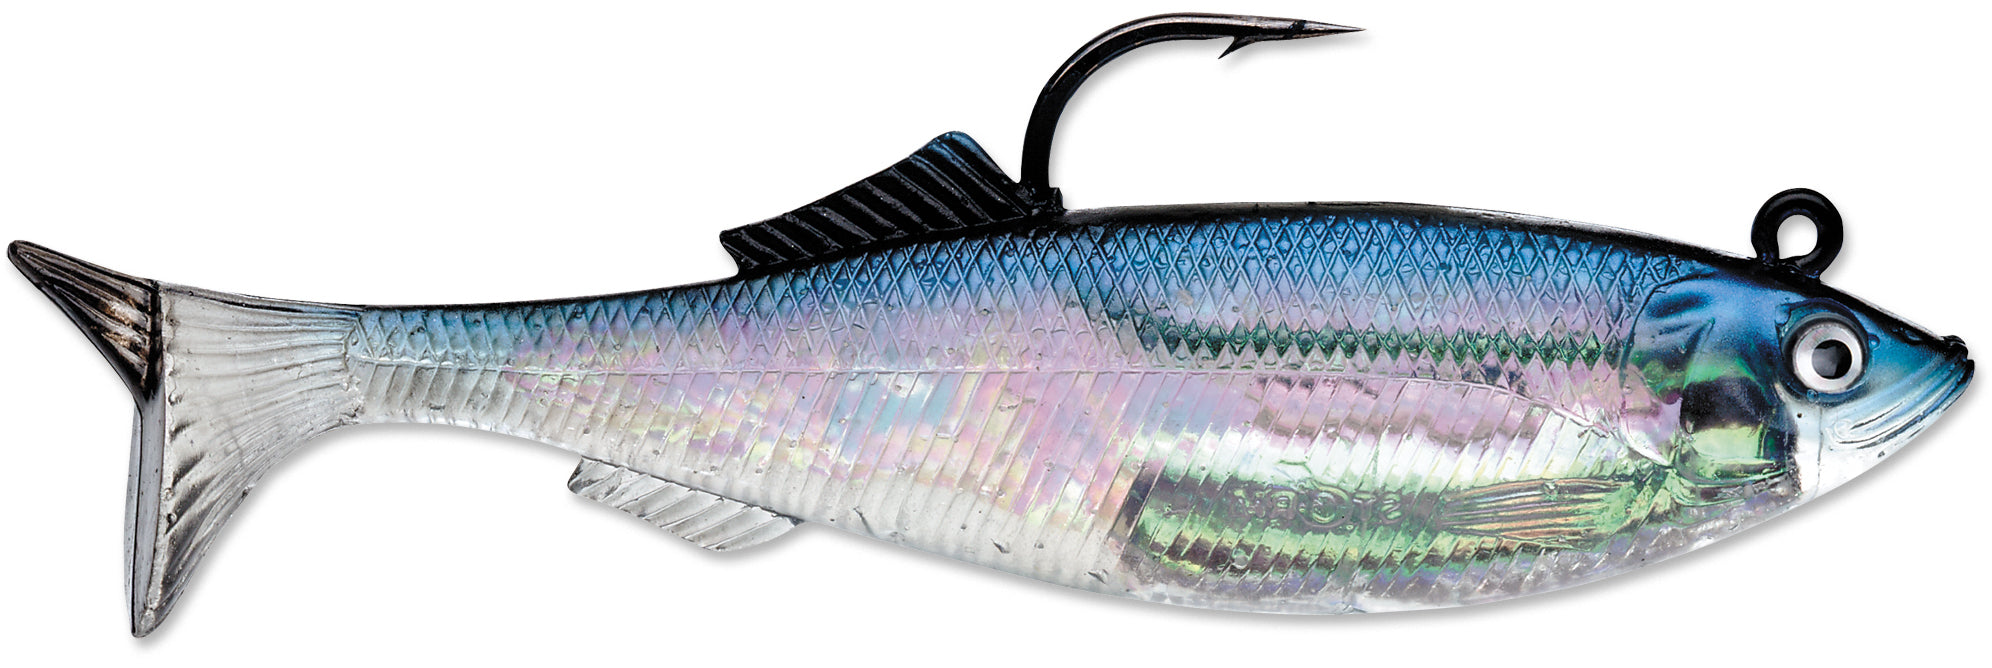 Storm WildEye Live Herring 5 inch Soft Swimbait 4 pack — Discount Tackle